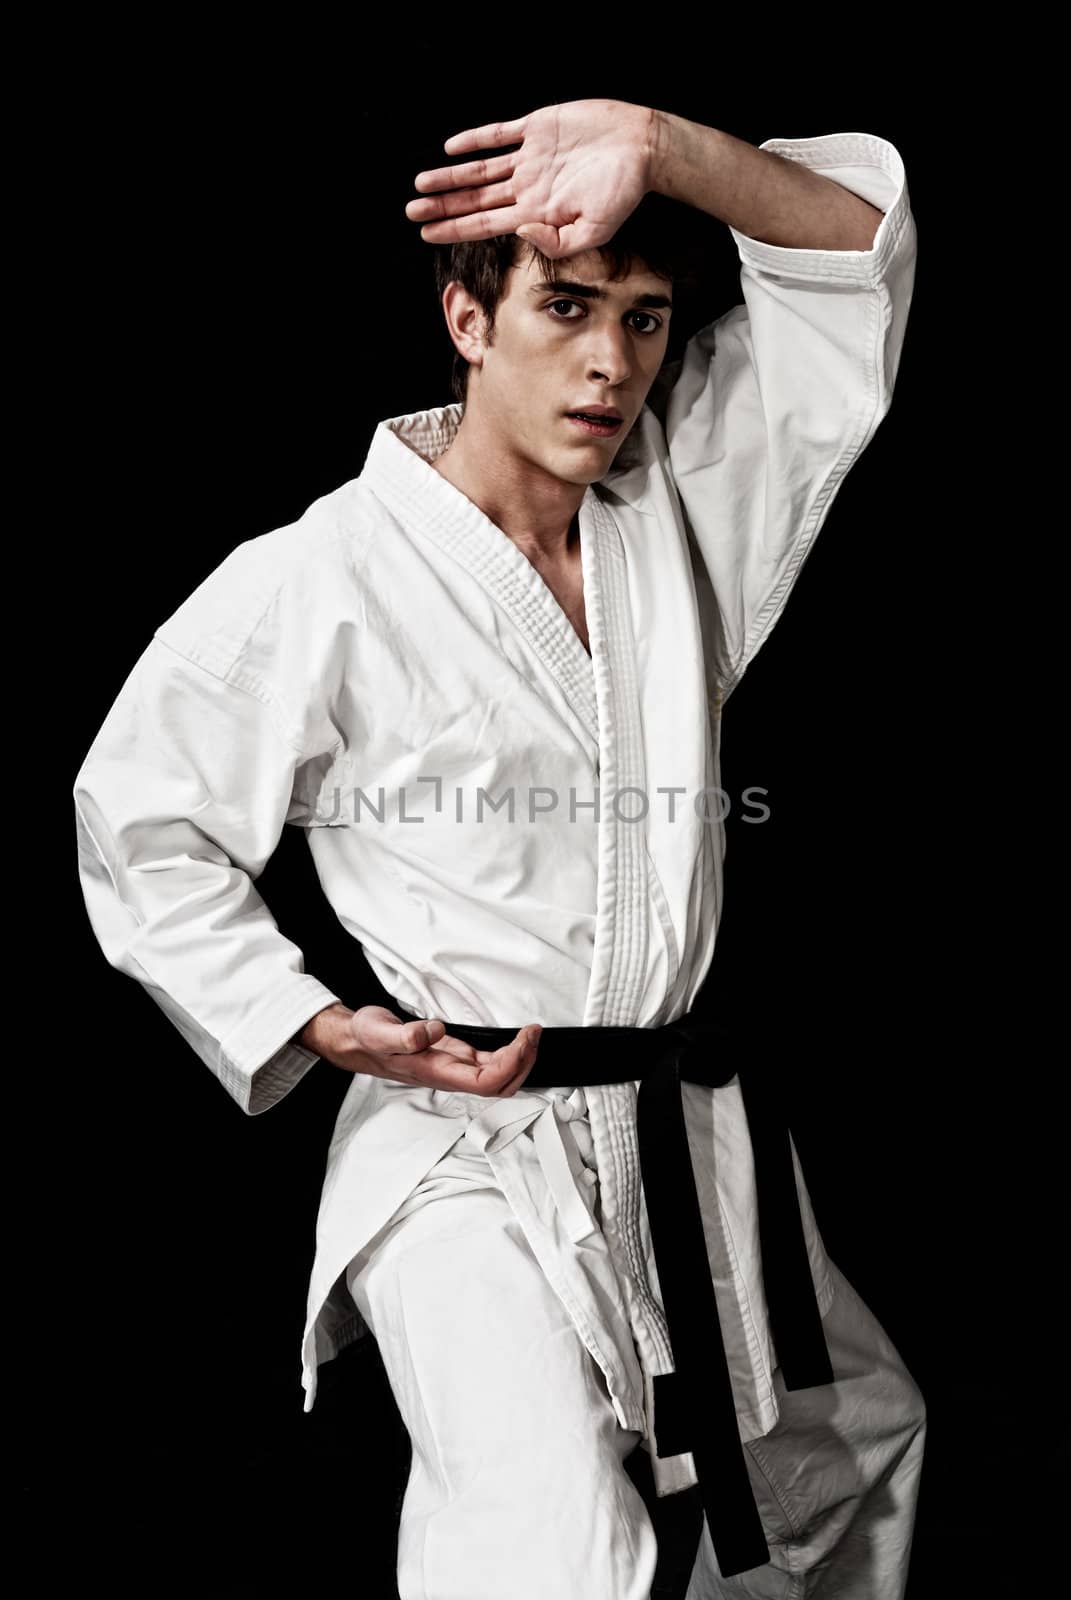 Karate male fighter young high contrast on black background